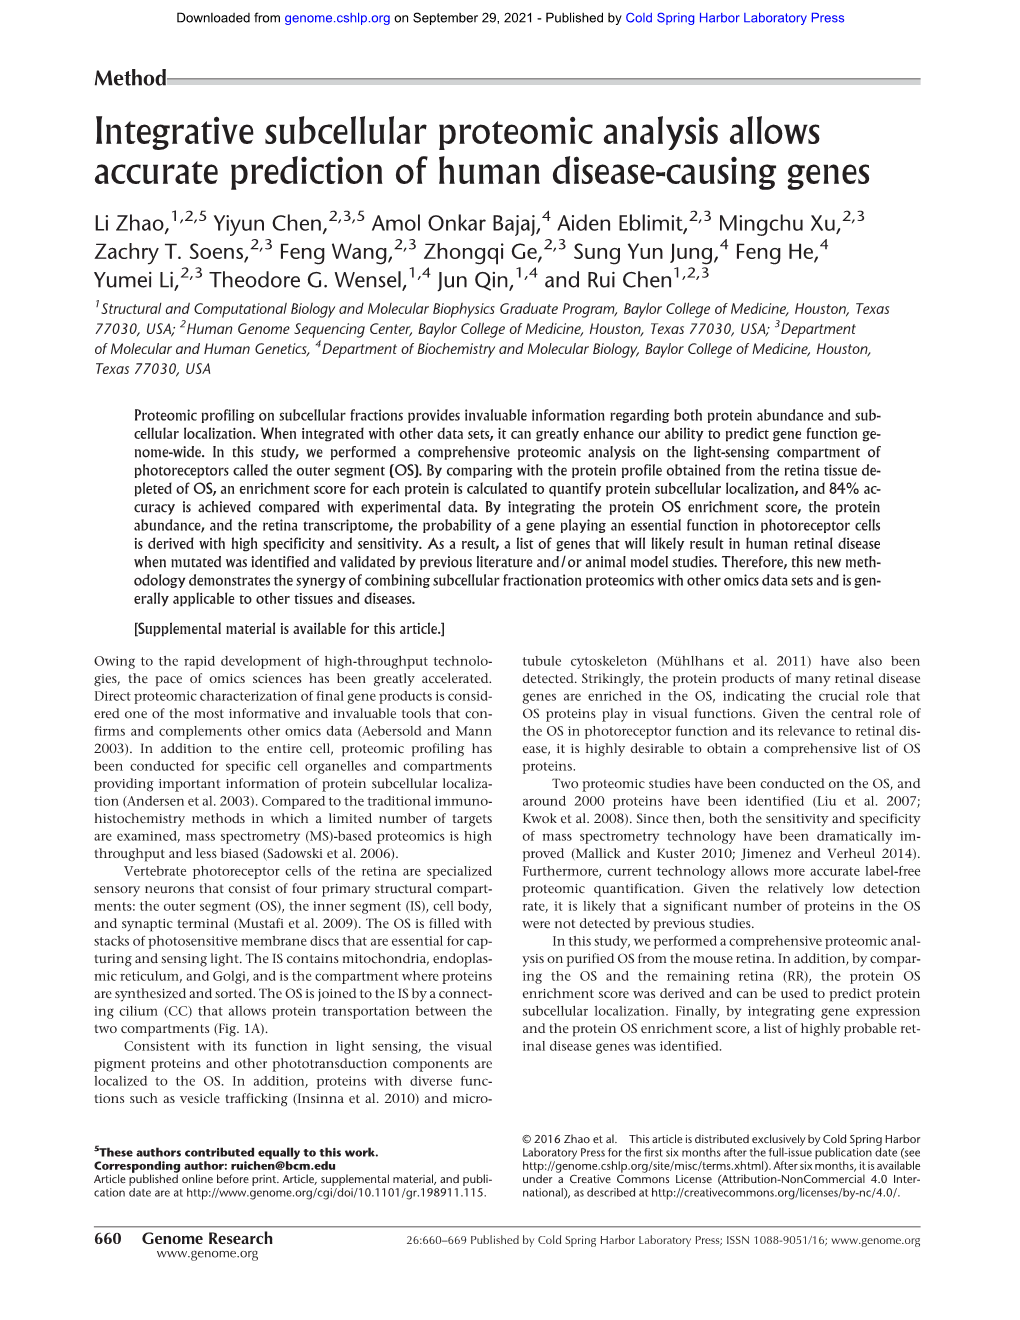 Integrative Subcellular Proteomic Analysis Allows Accurate Prediction of Human Disease-Causing Genes